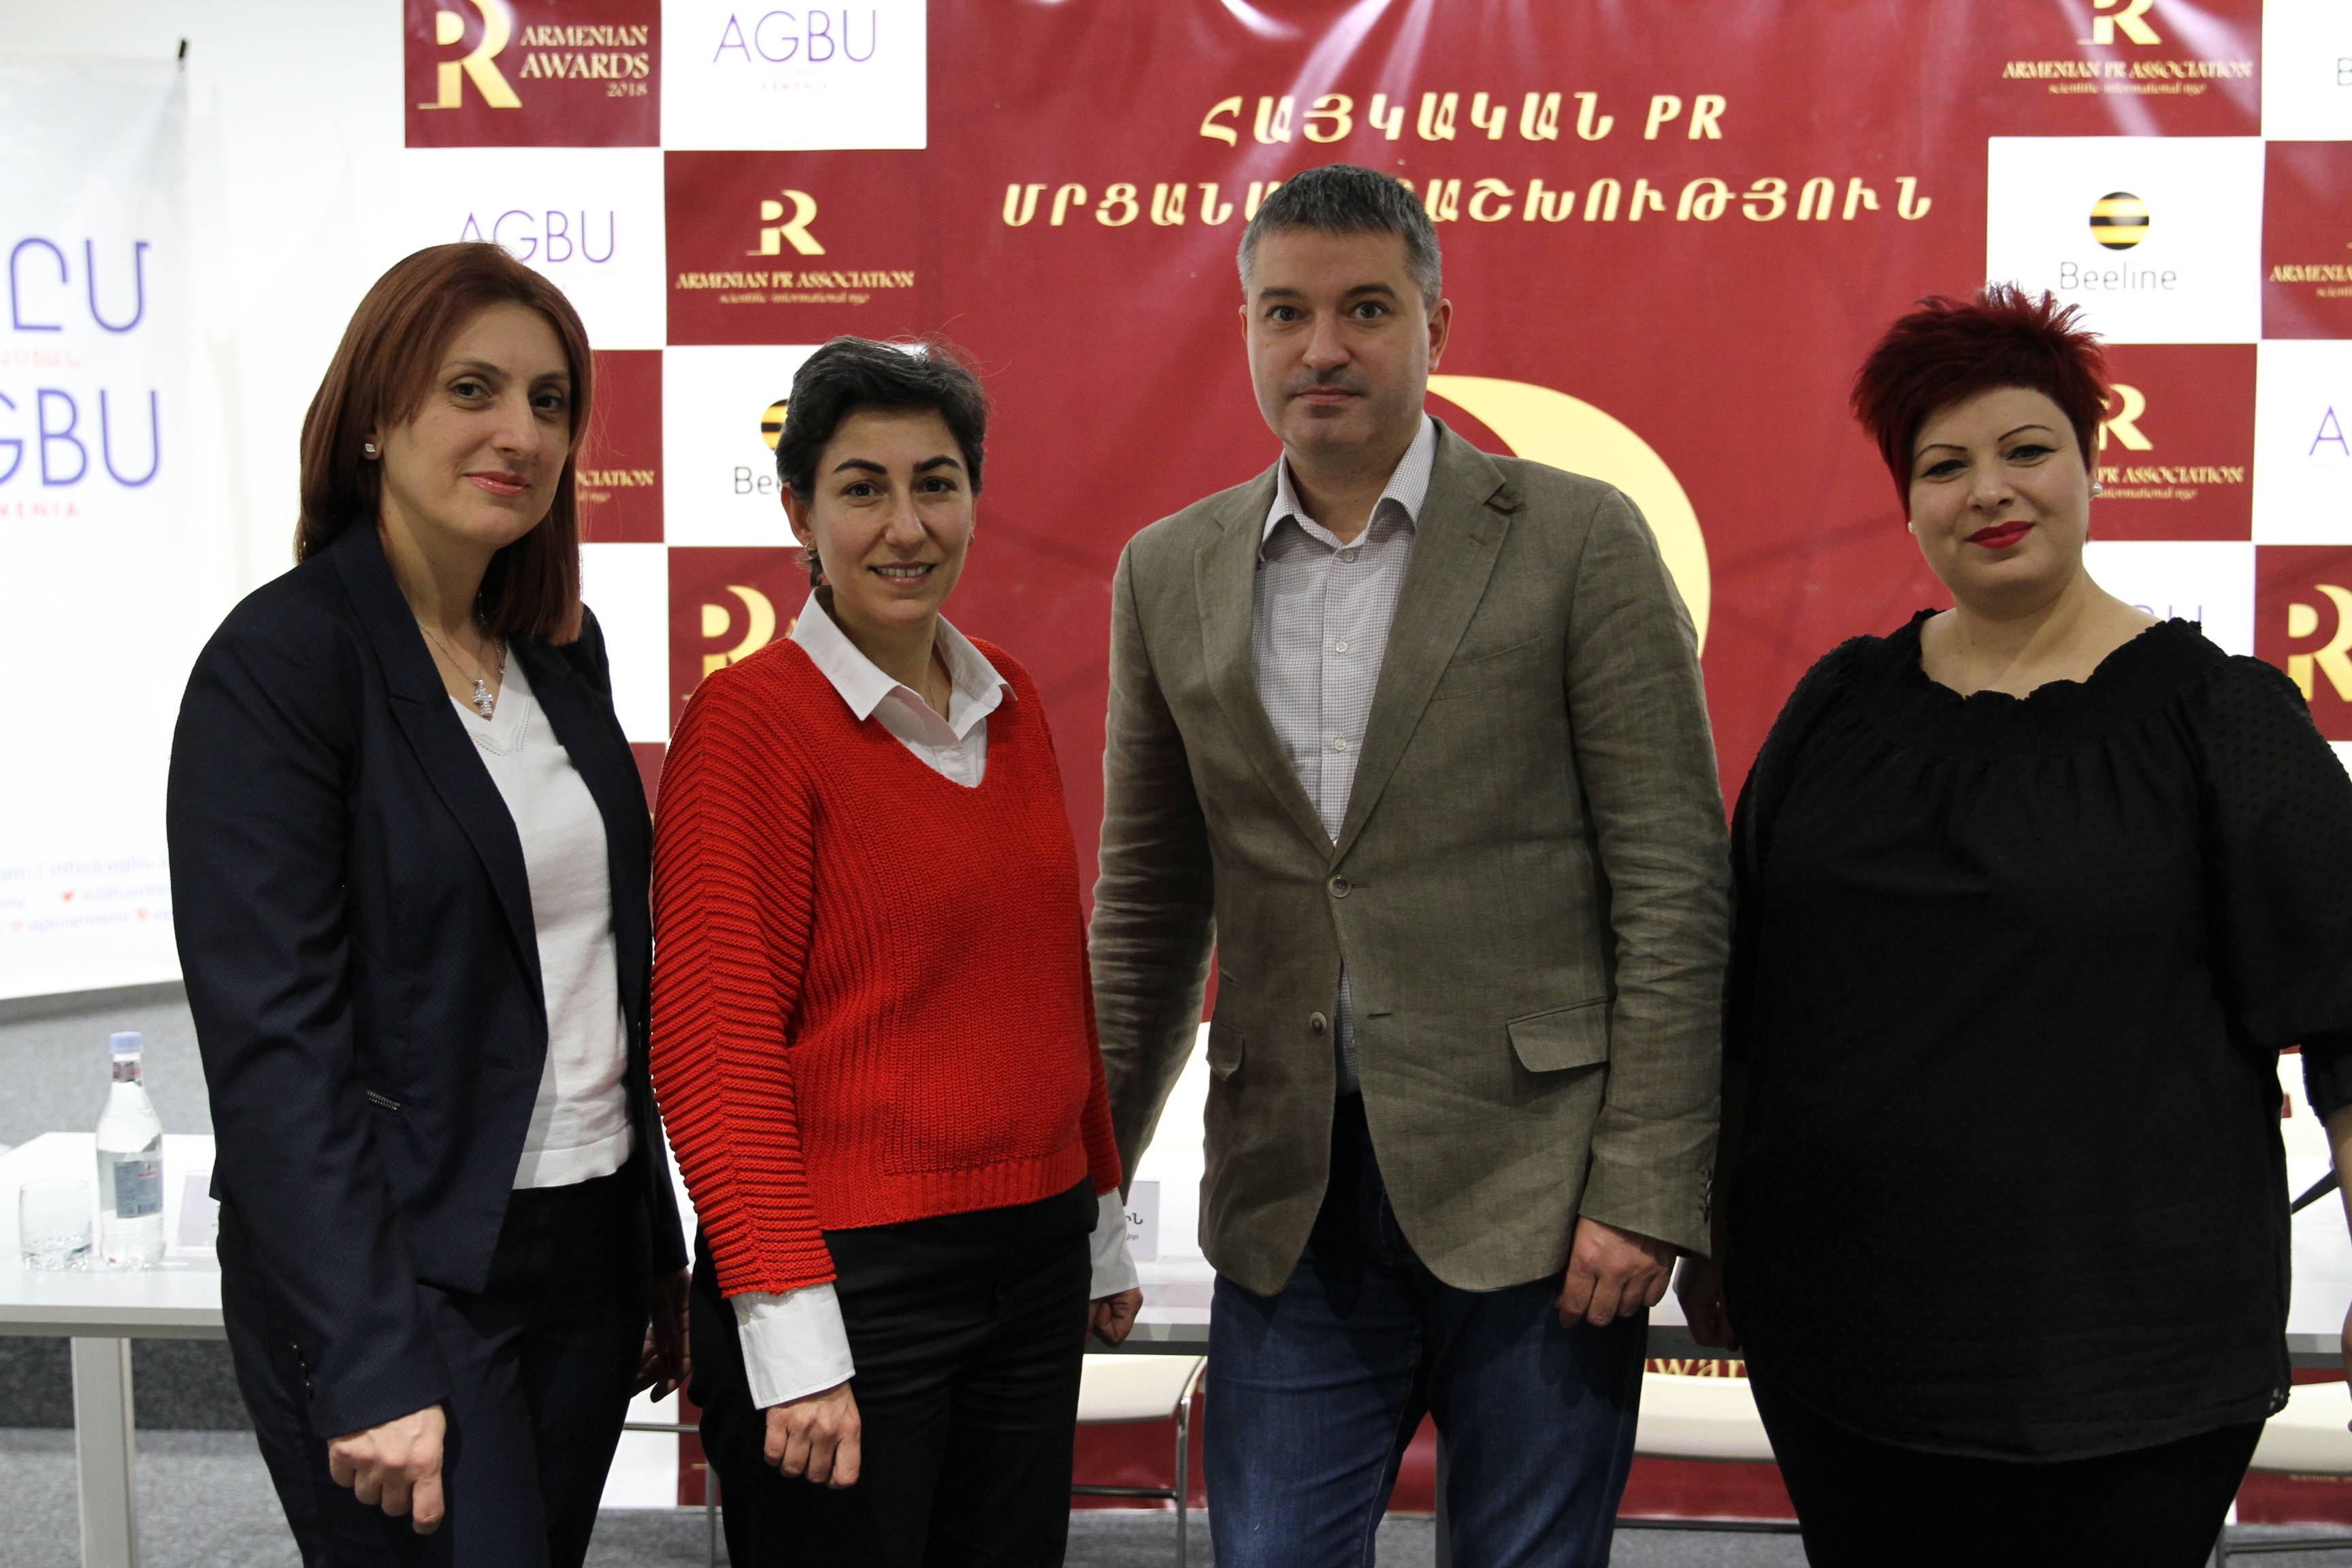 The best PR managers of Armenia will be awarded for the third time